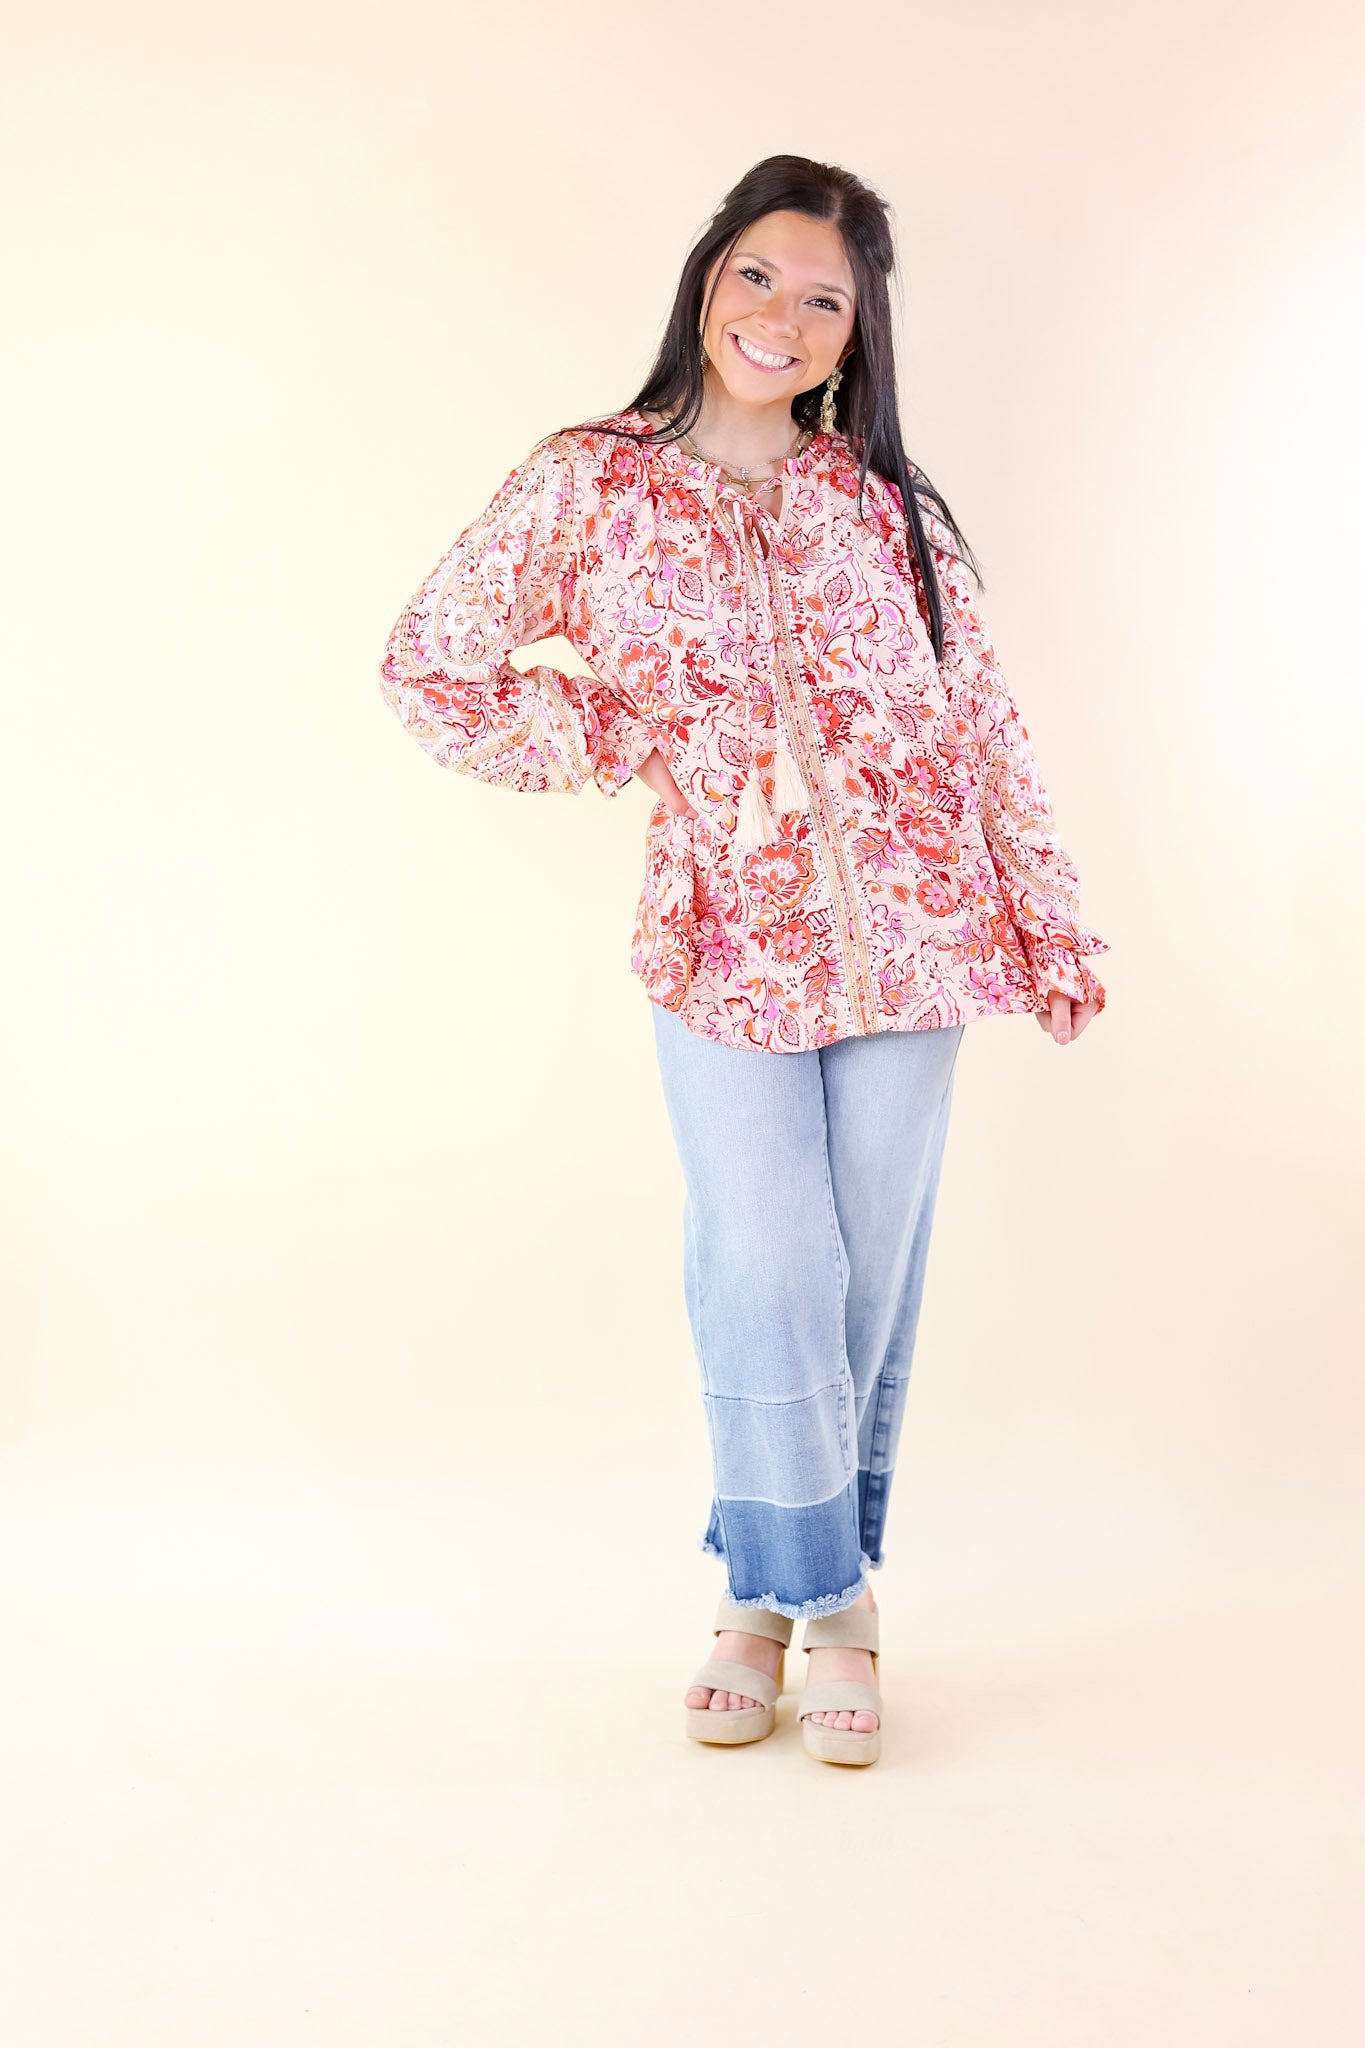 Springtime Delight Long Sleeve Floral Print Top with Embroidery in Ivory - Giddy Up Glamour Boutique